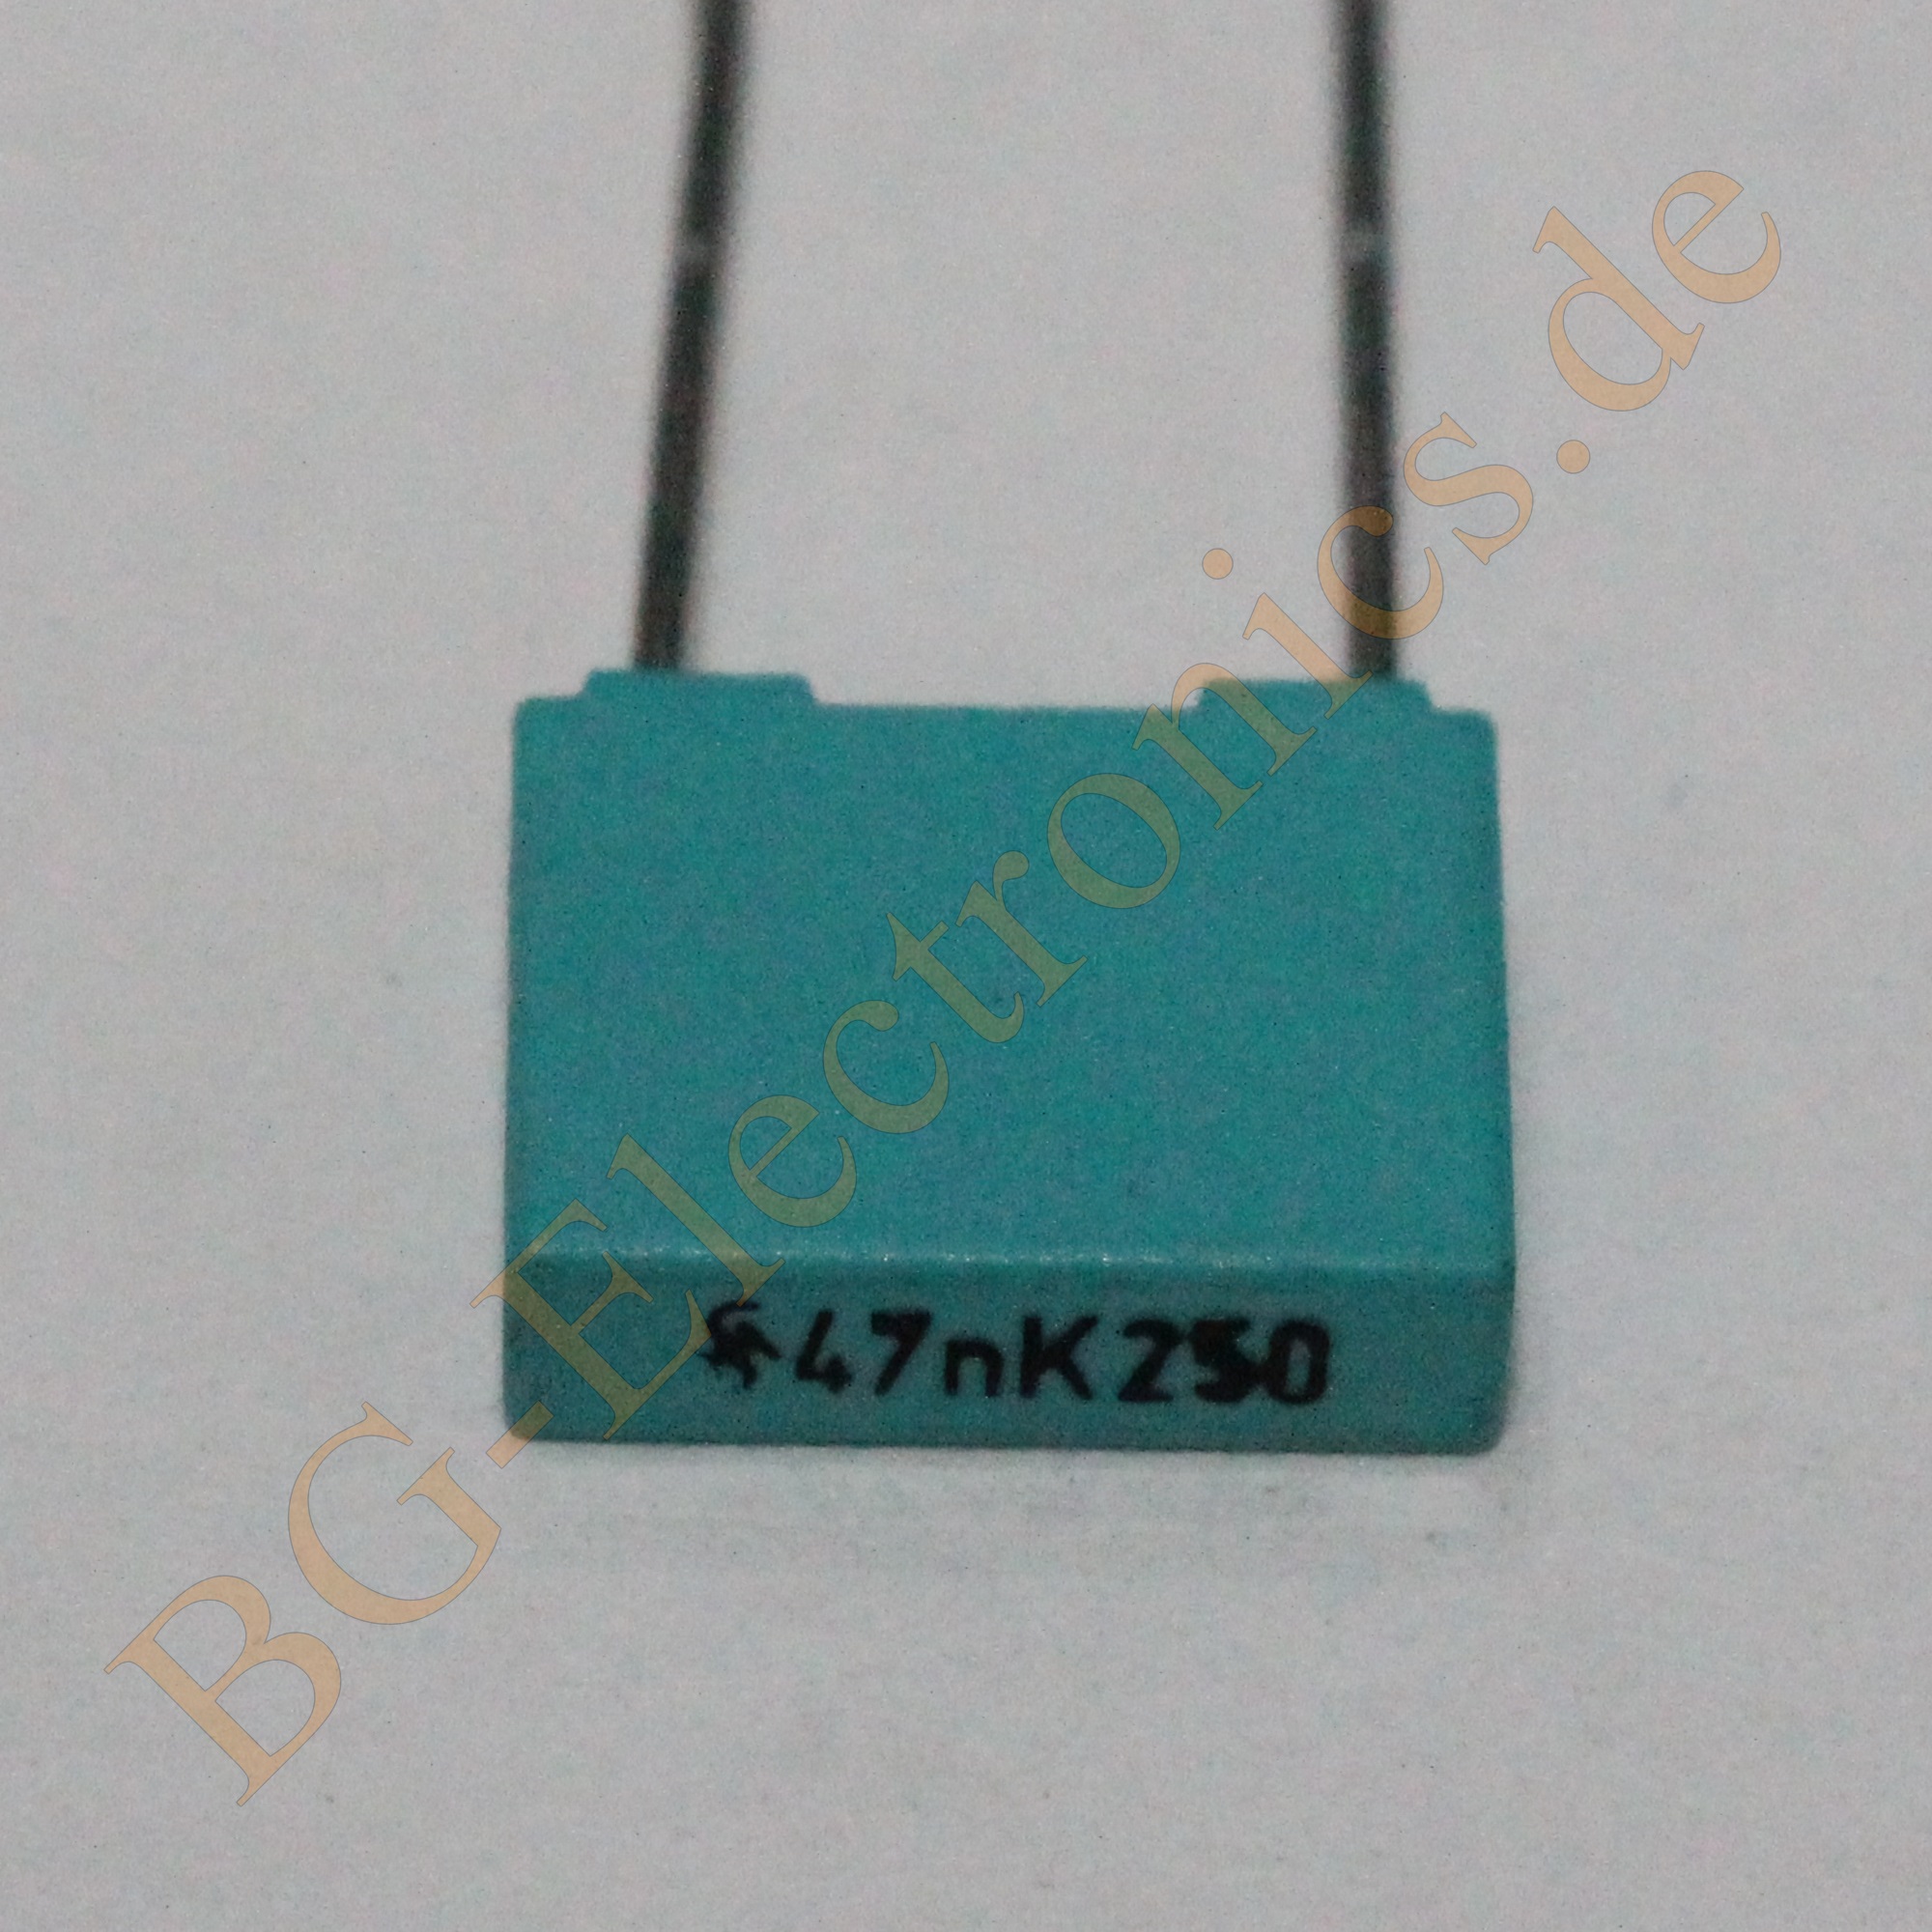 FO-R 47nF / 250V / RM7.5